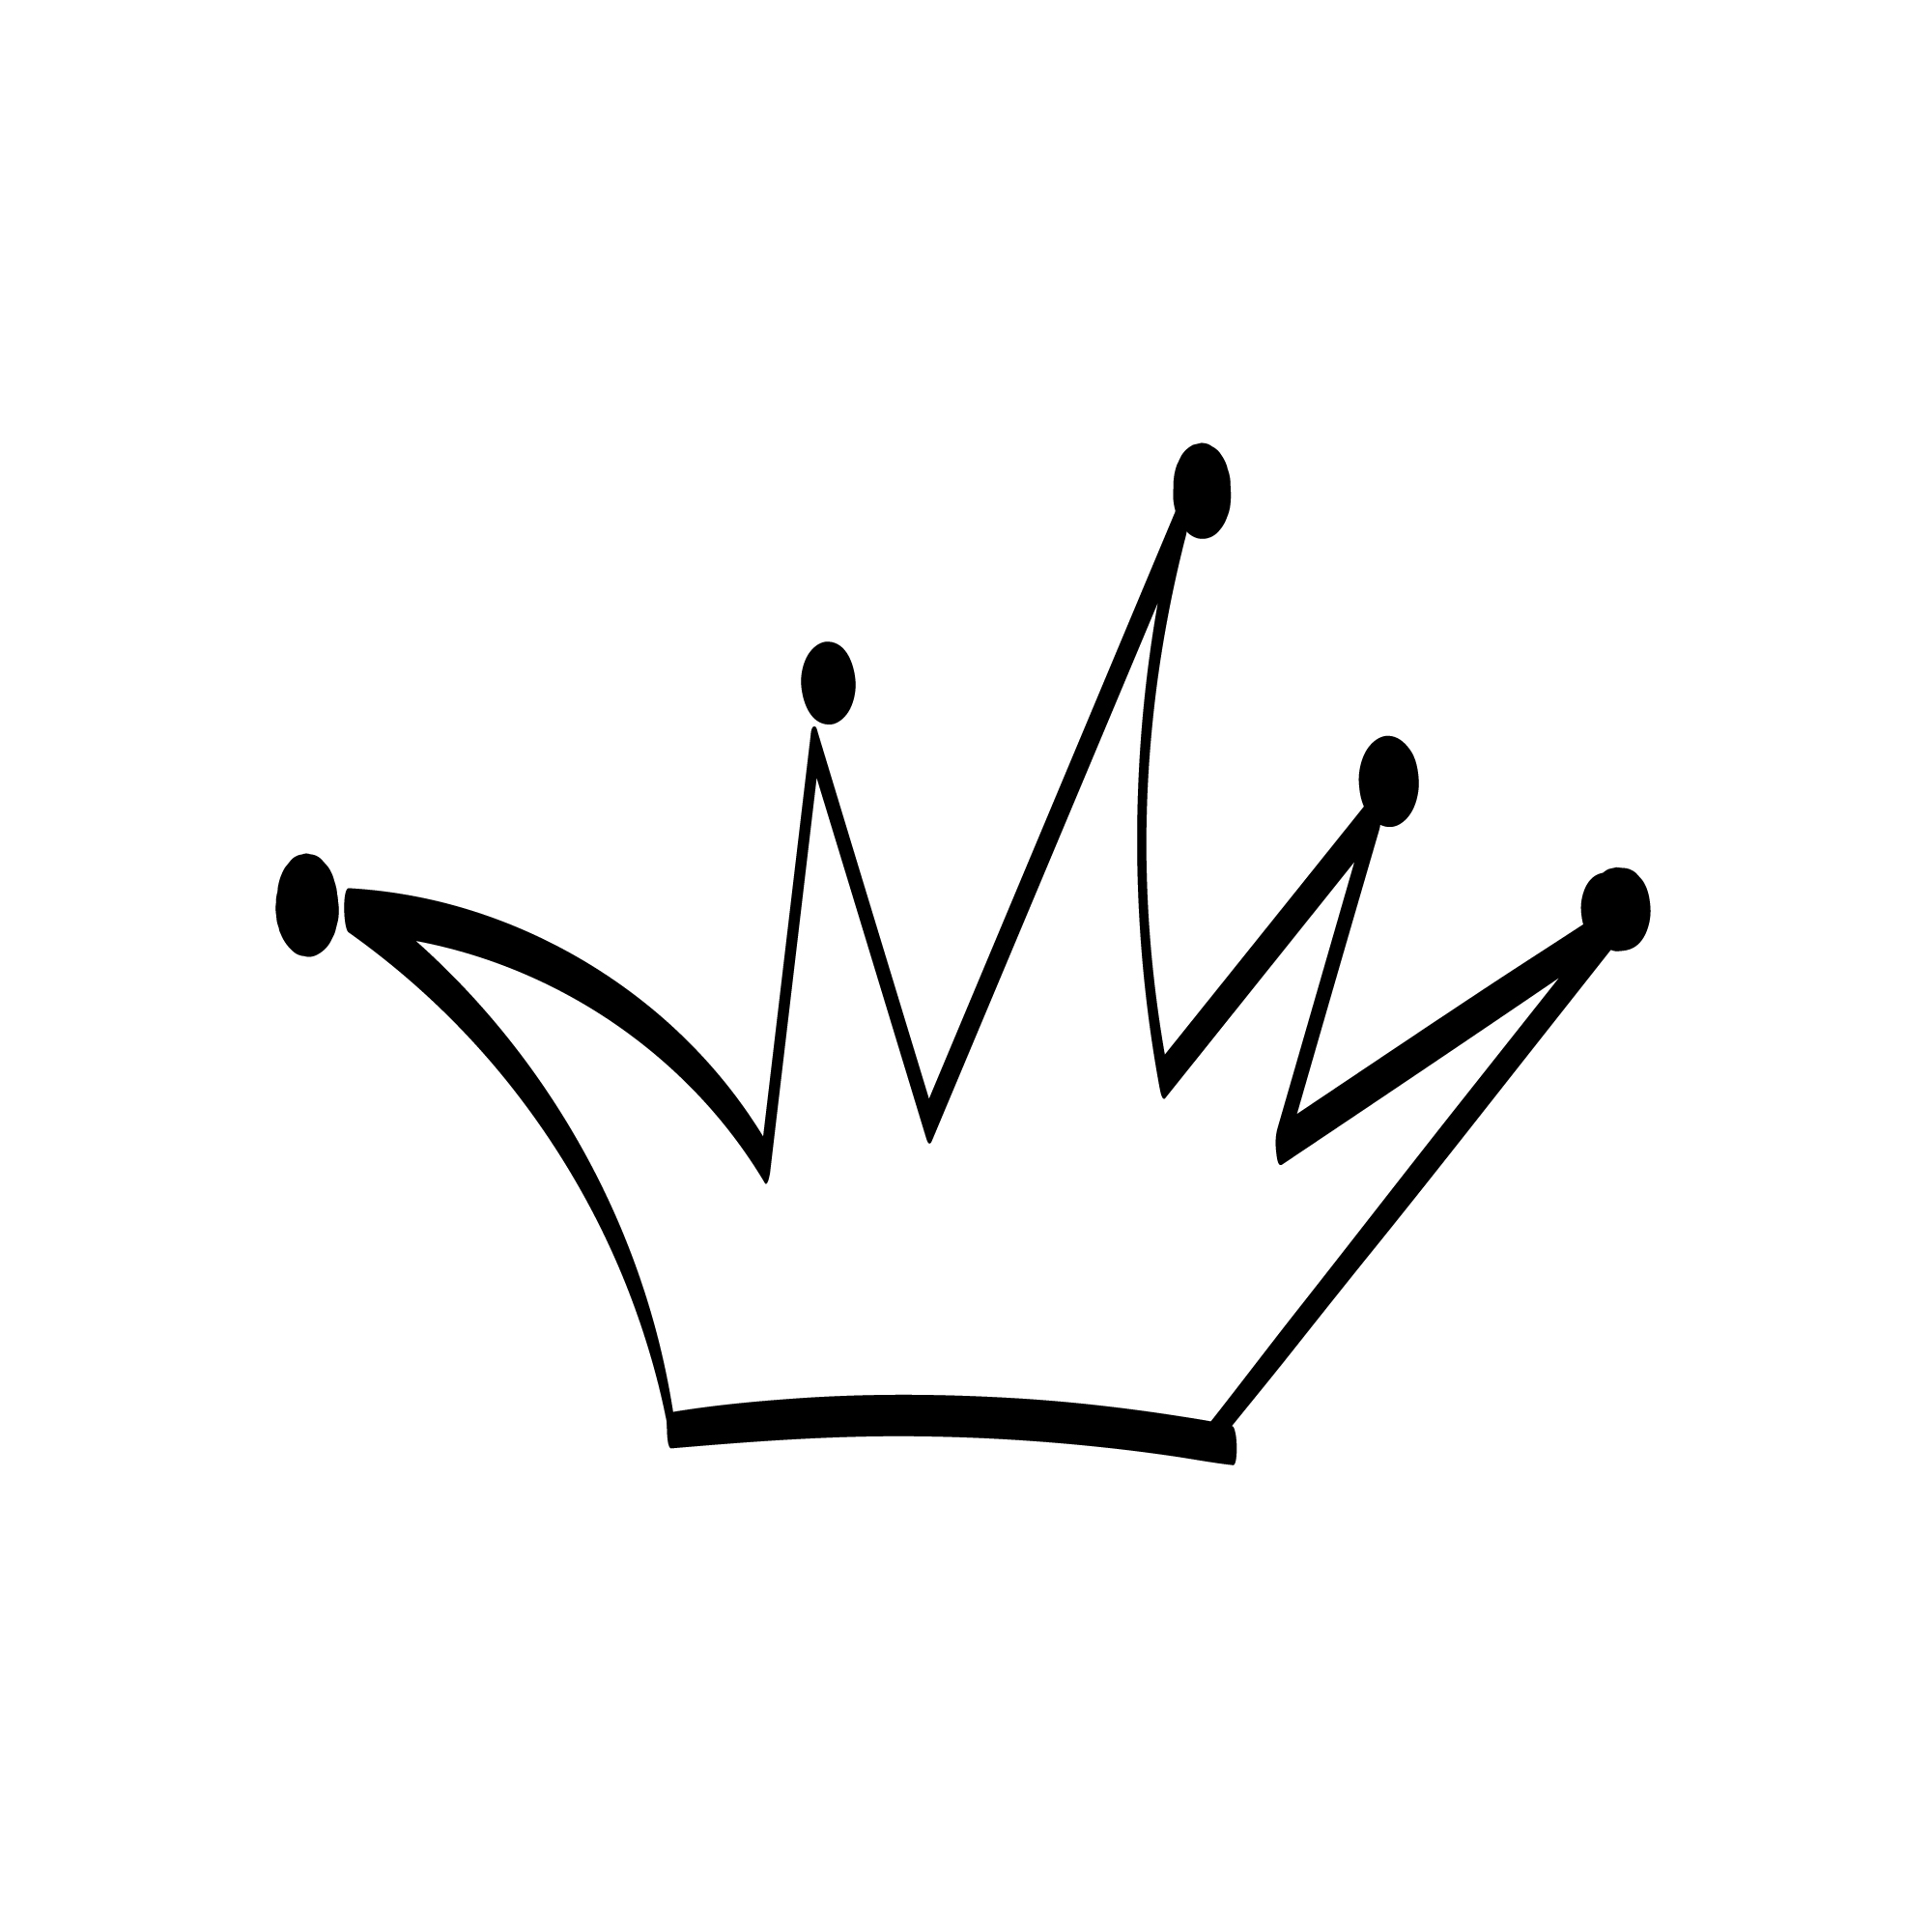 11 Hand Drawn Doodle Crowns for cute design.